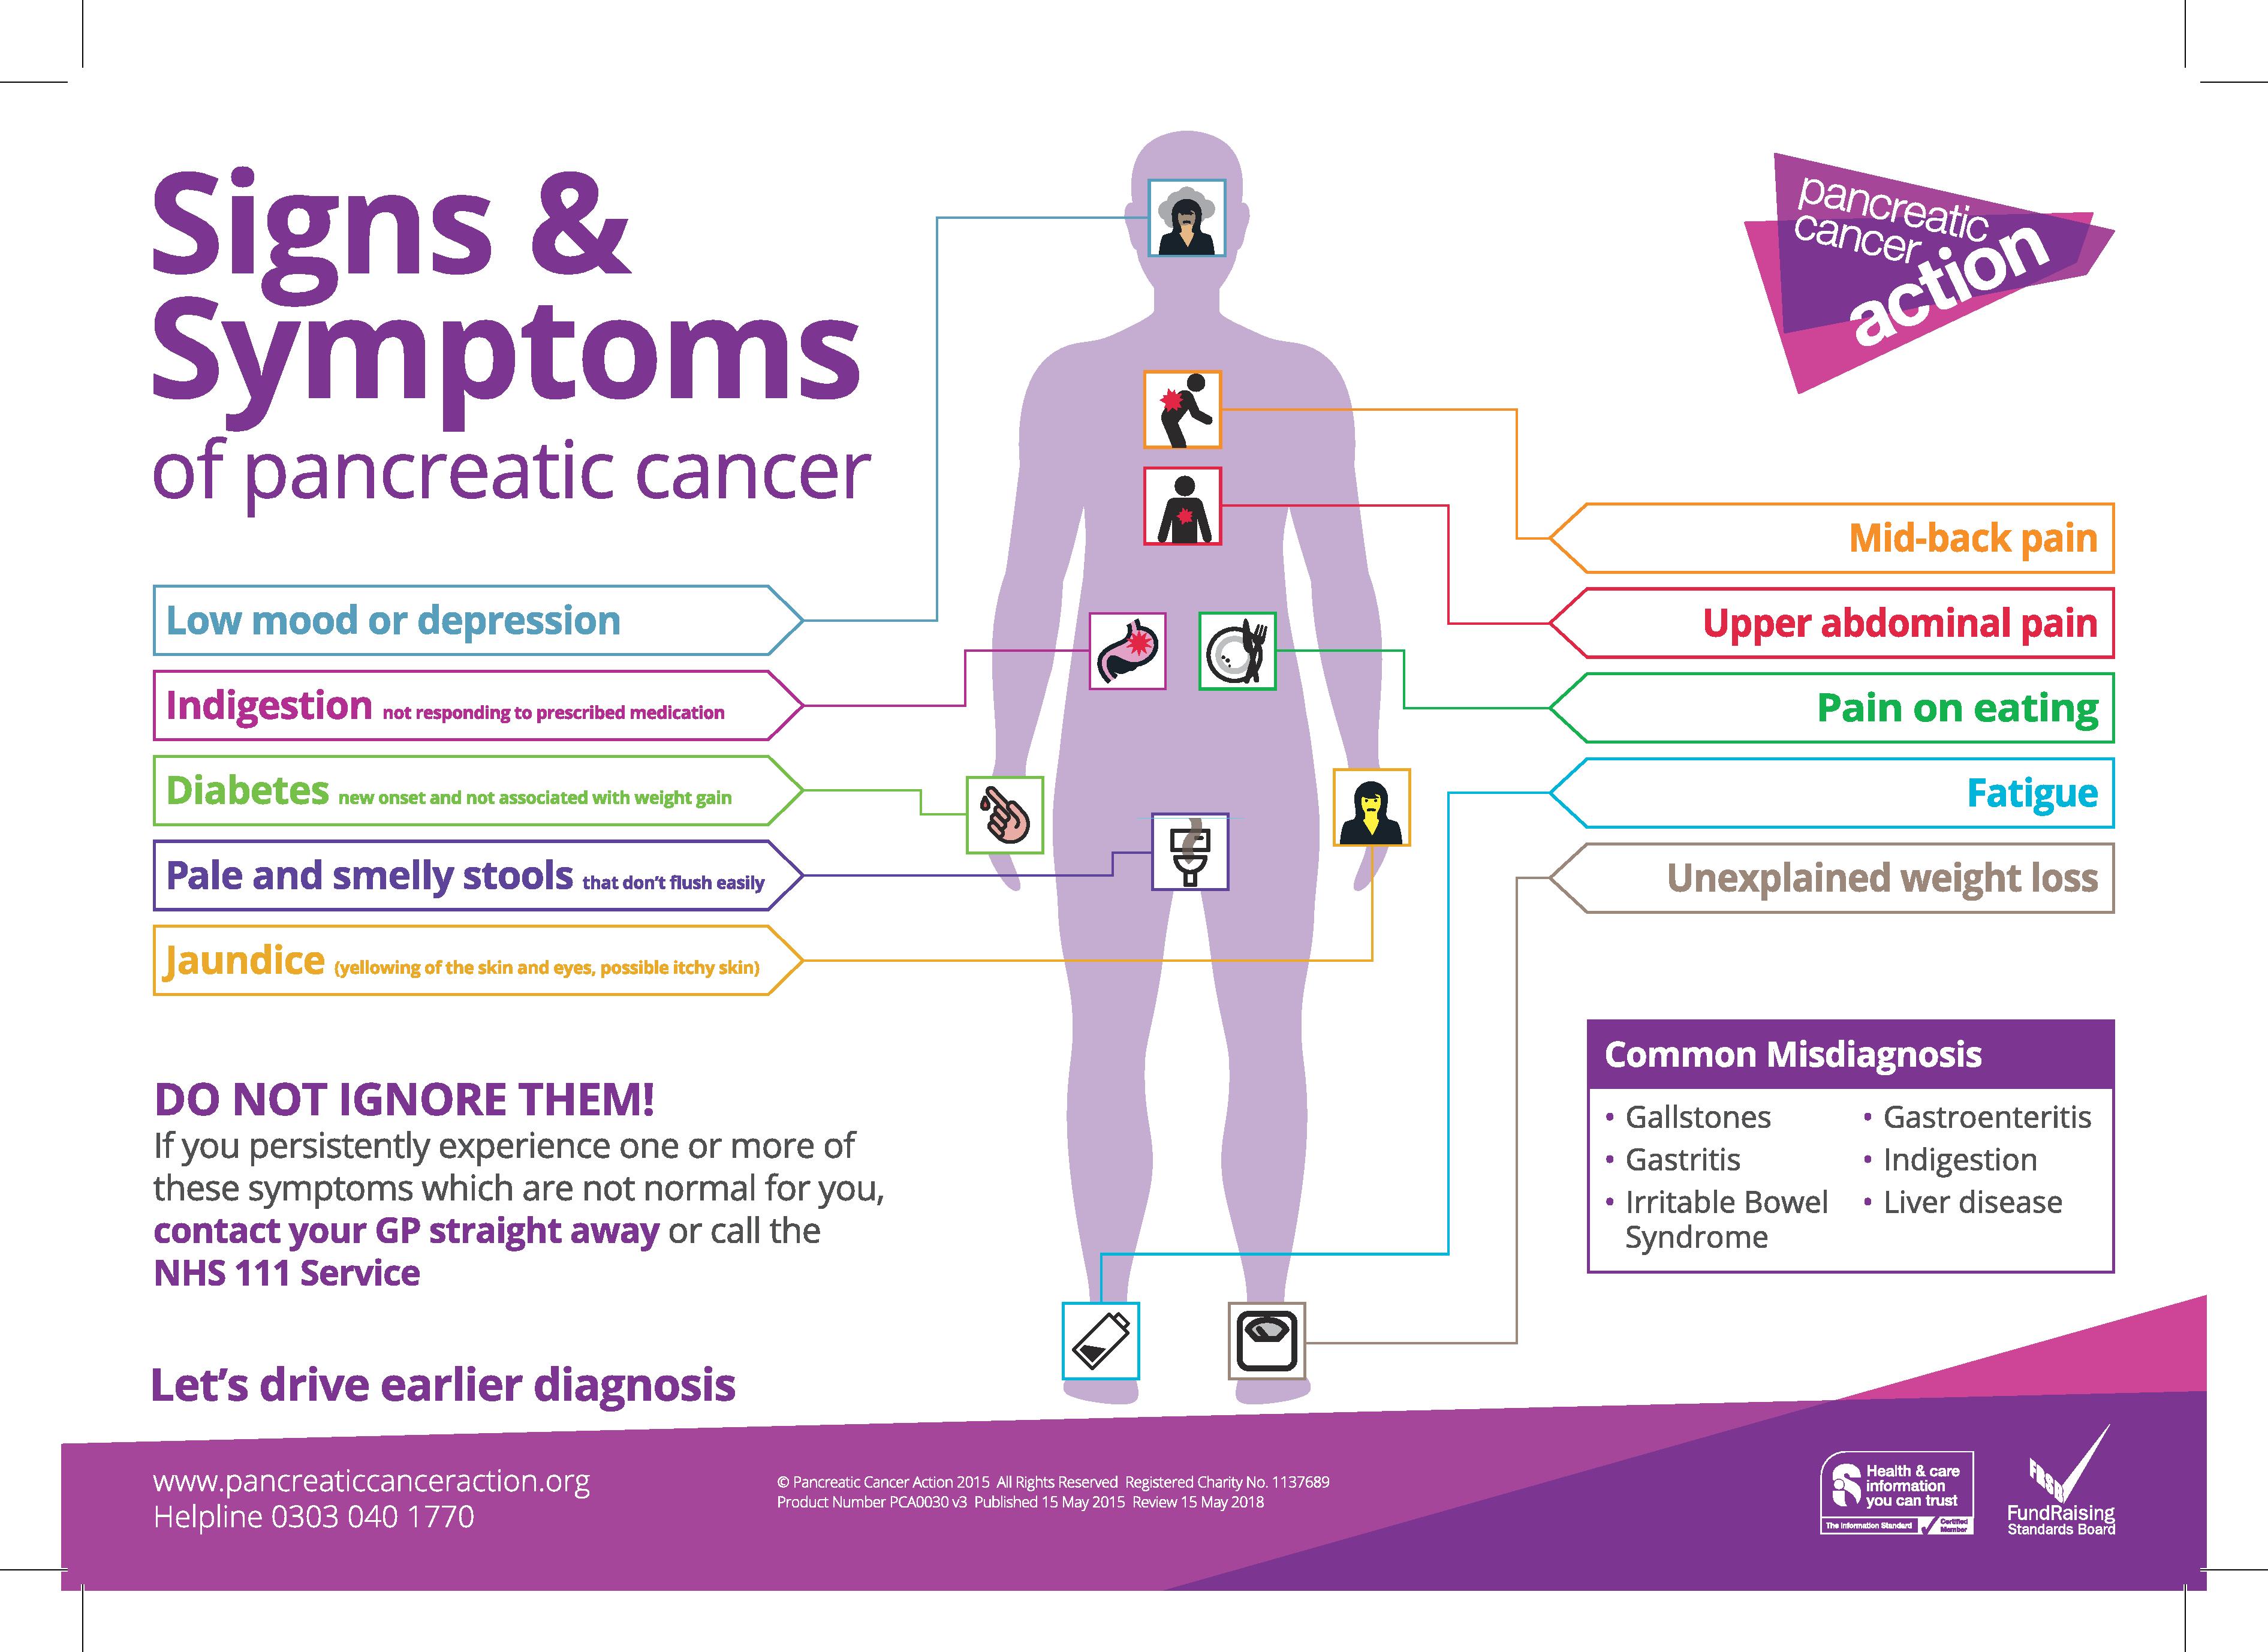 Pancreatic cancer end of life symptoms